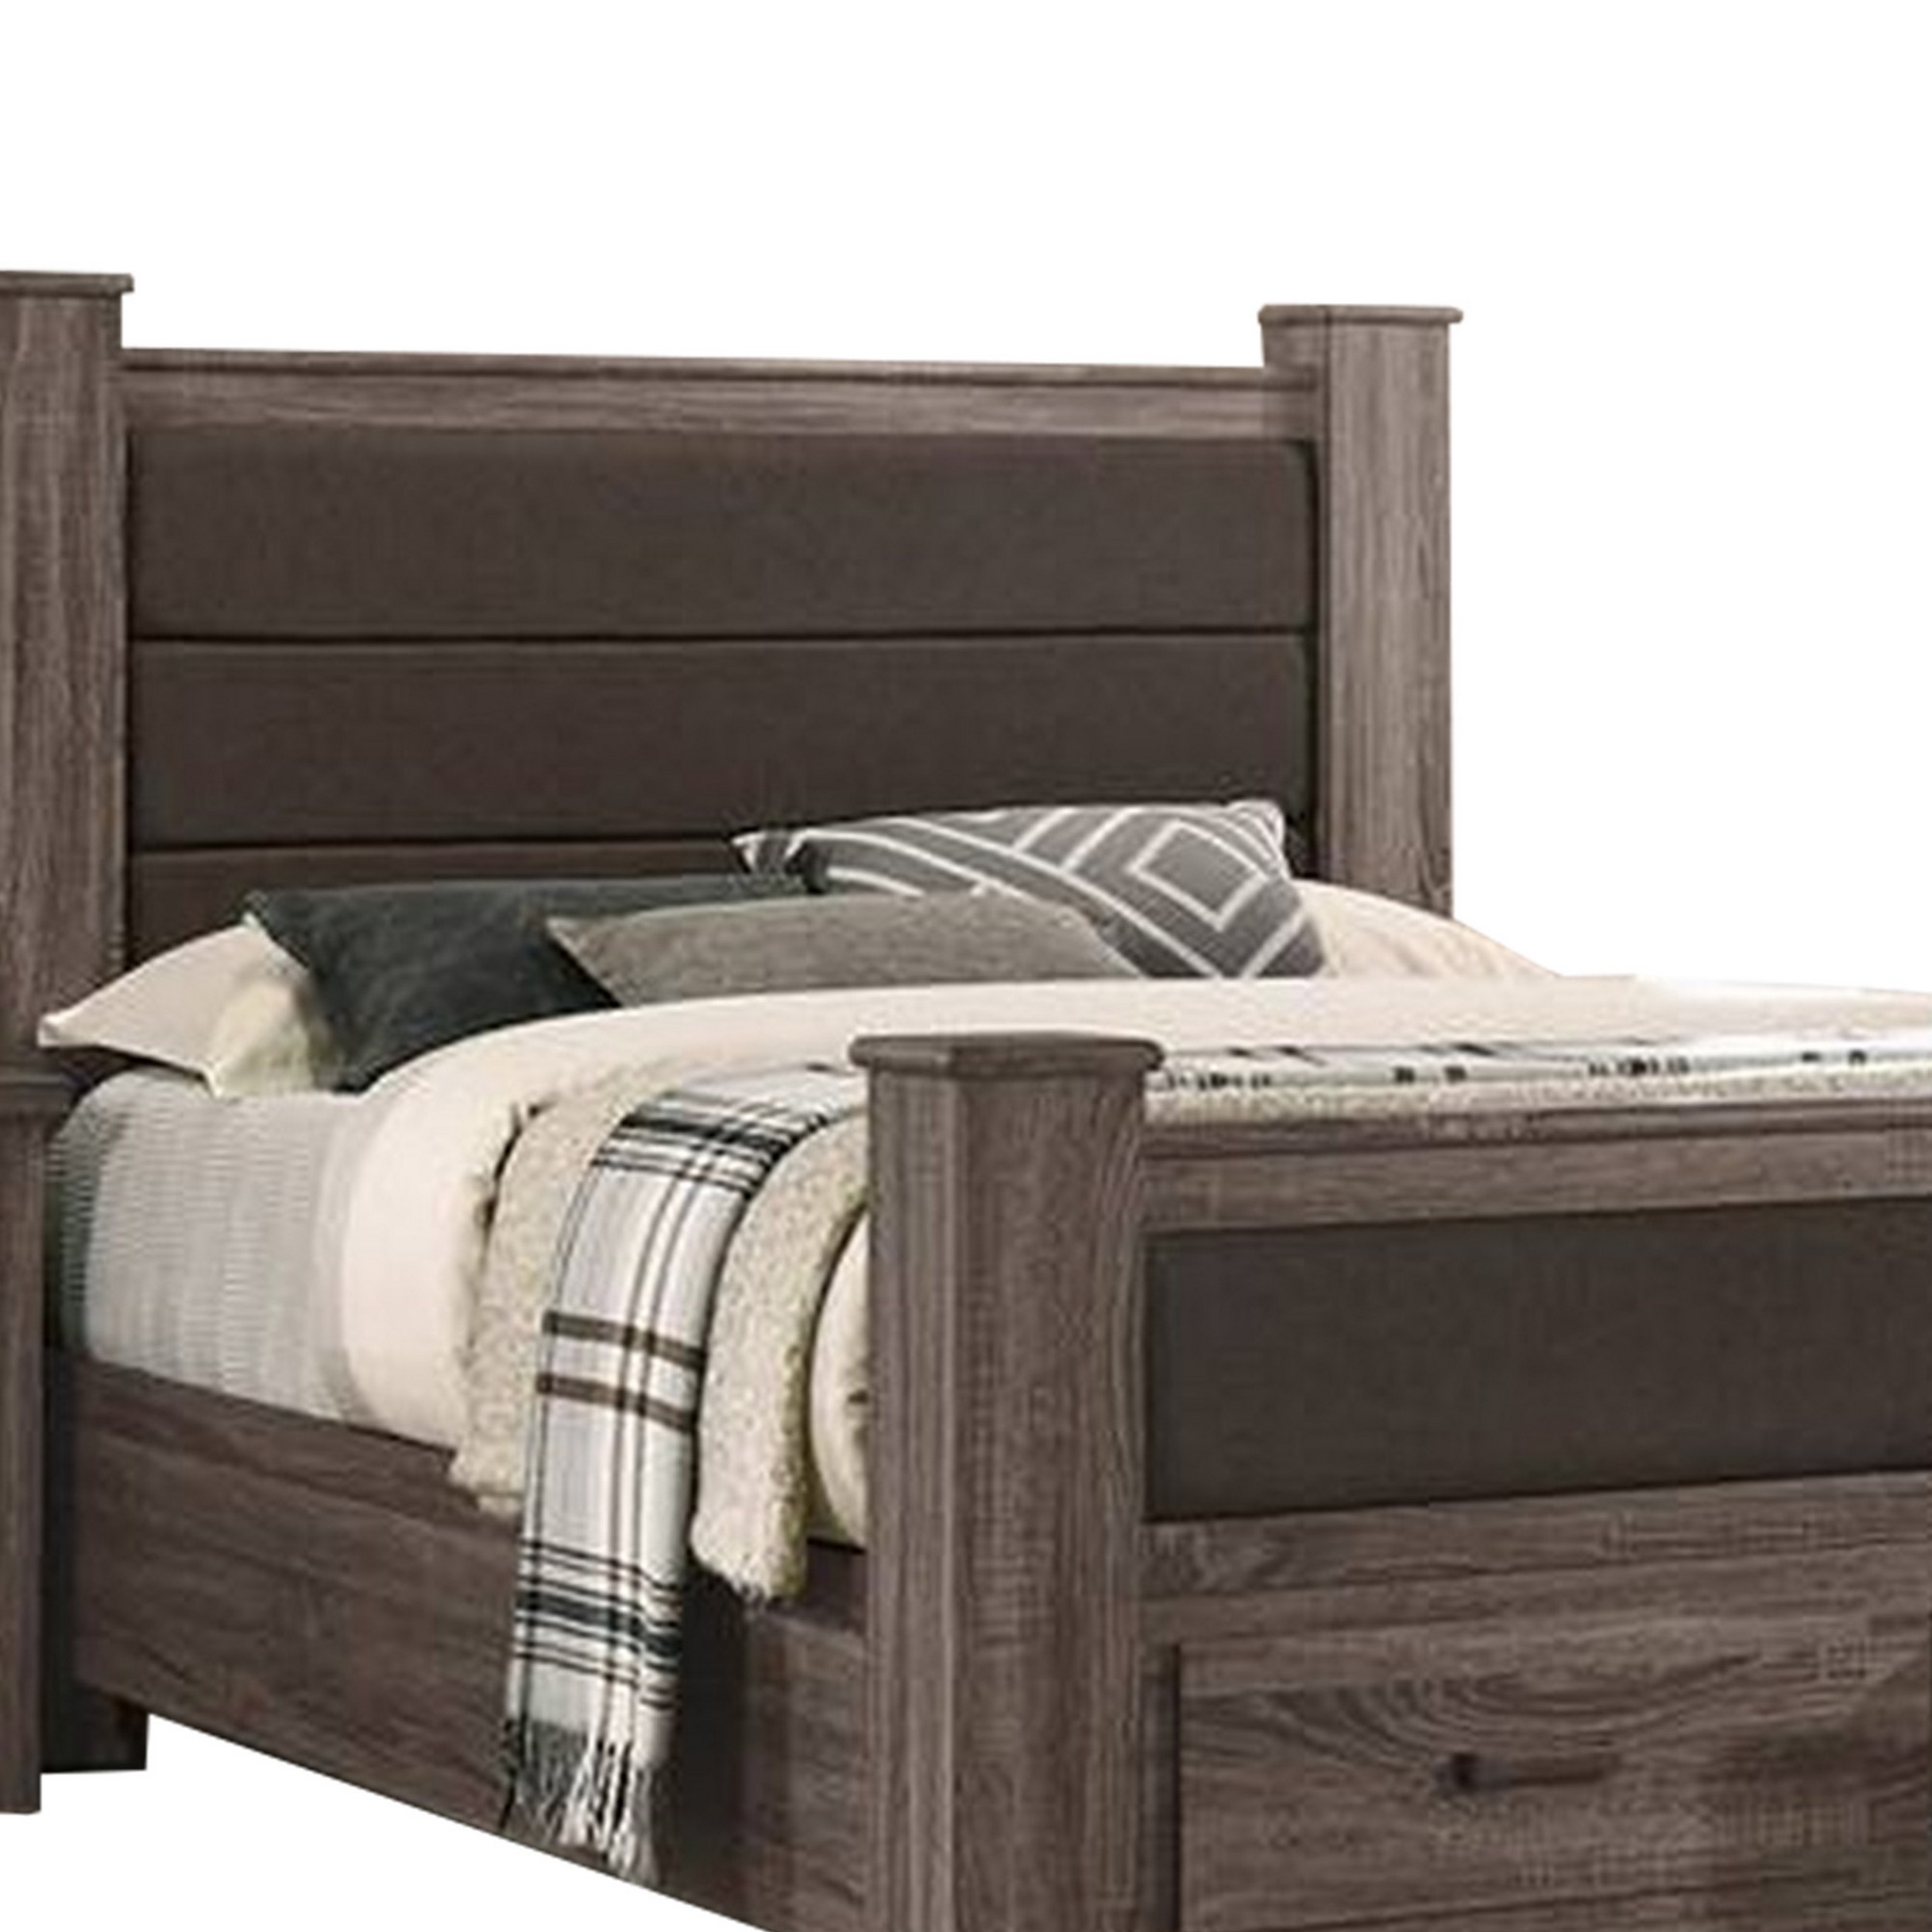 Fort Classic Queen Sized Bed With 2 Drawers, Upholstered Panel, Oak Gray- Saltoro Sherpi